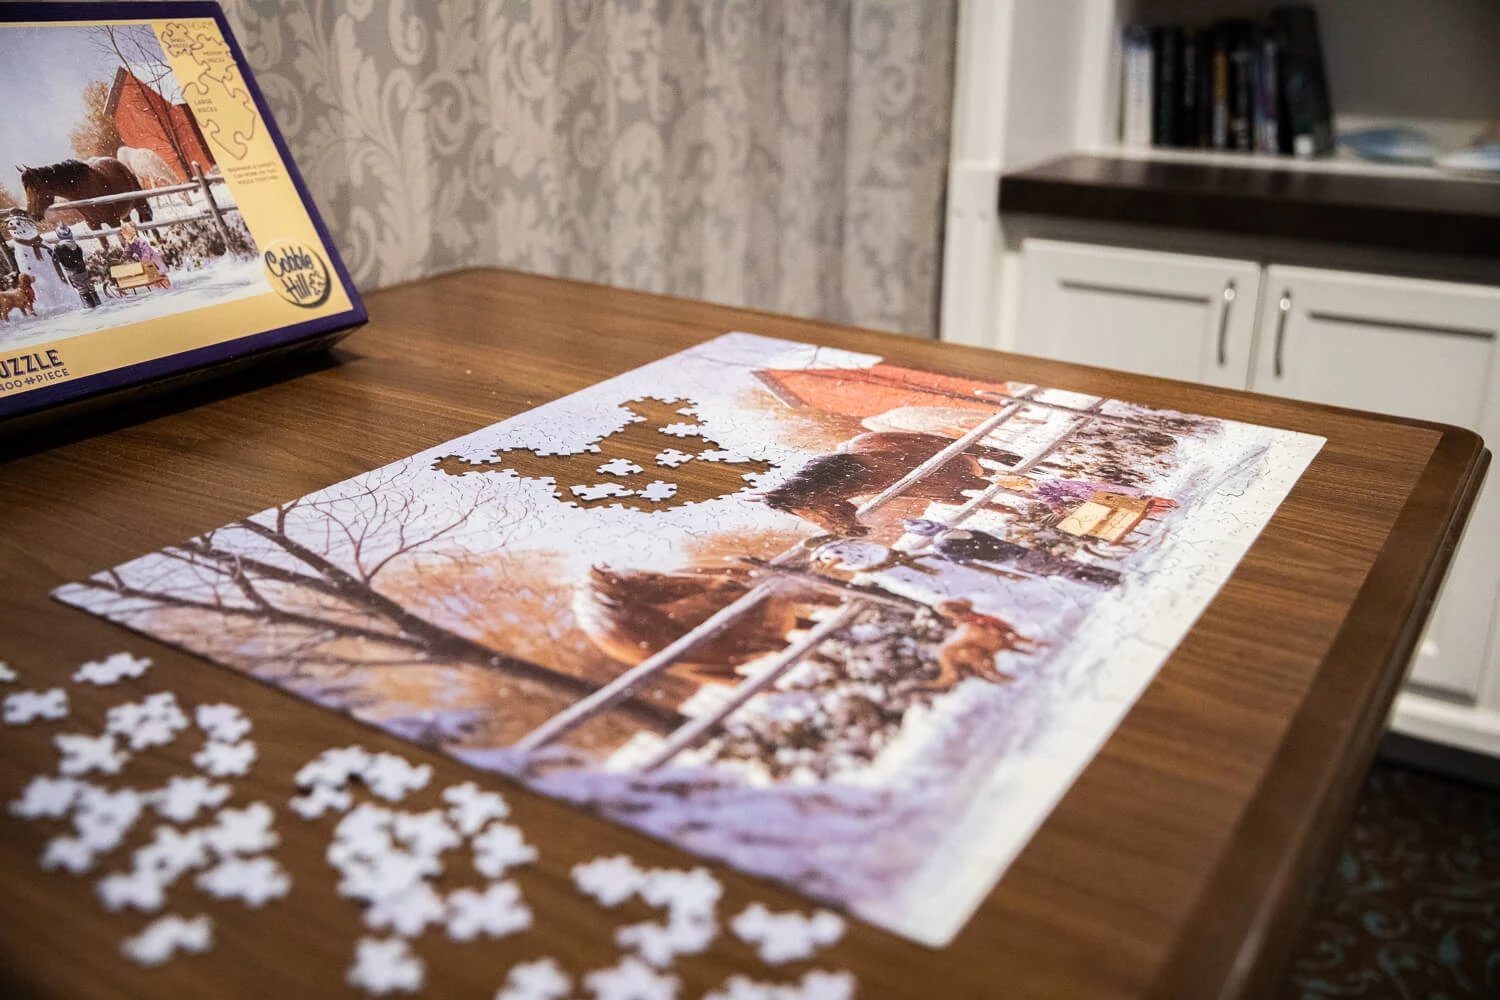 unfinished puzzle on table